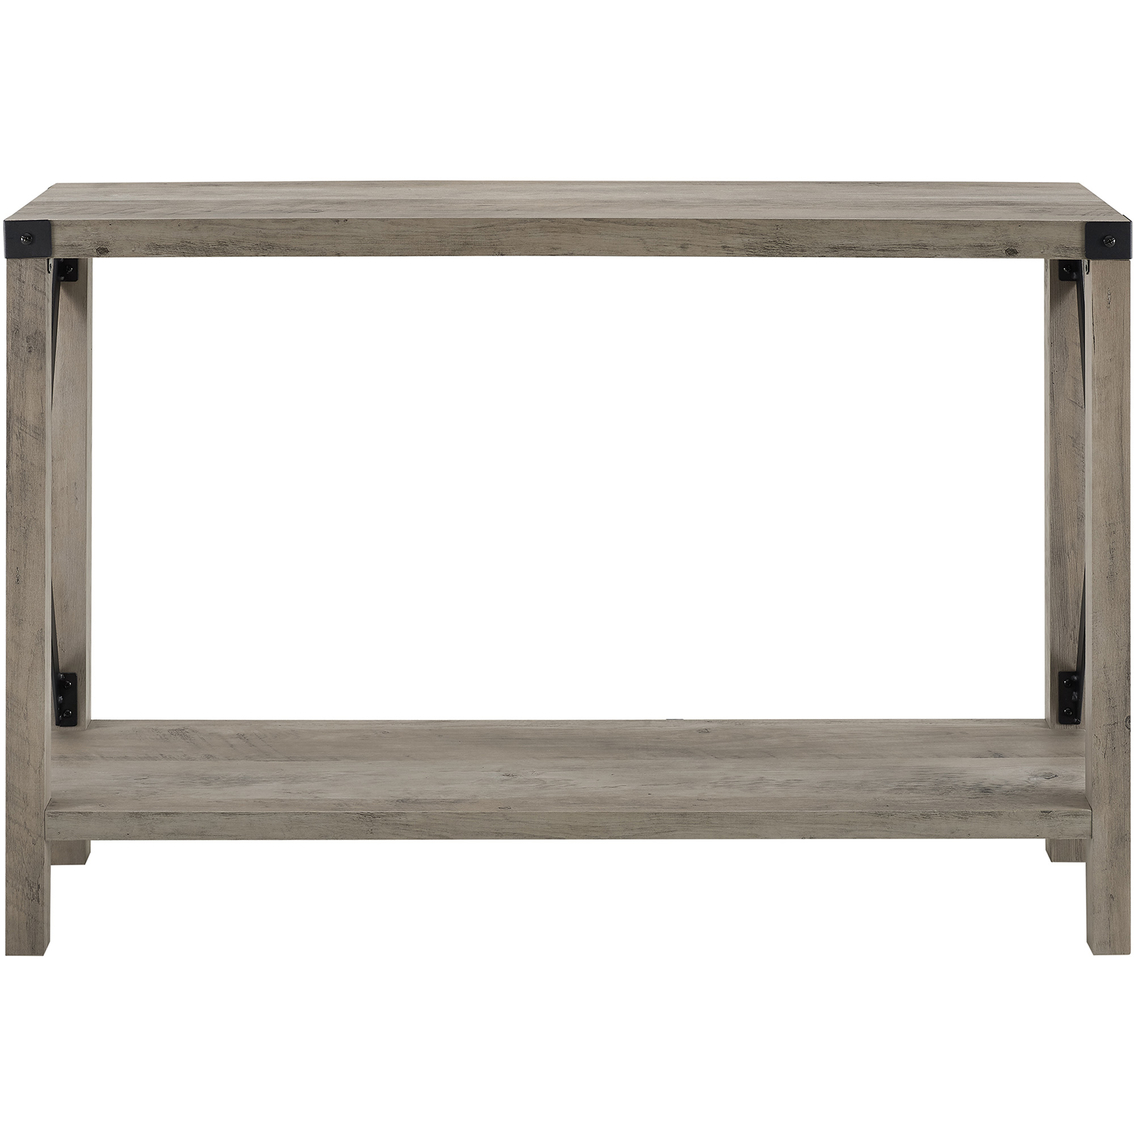 Walker Edison 46 in. Rustic Farmhouse Entryway Table - Image 2 of 4